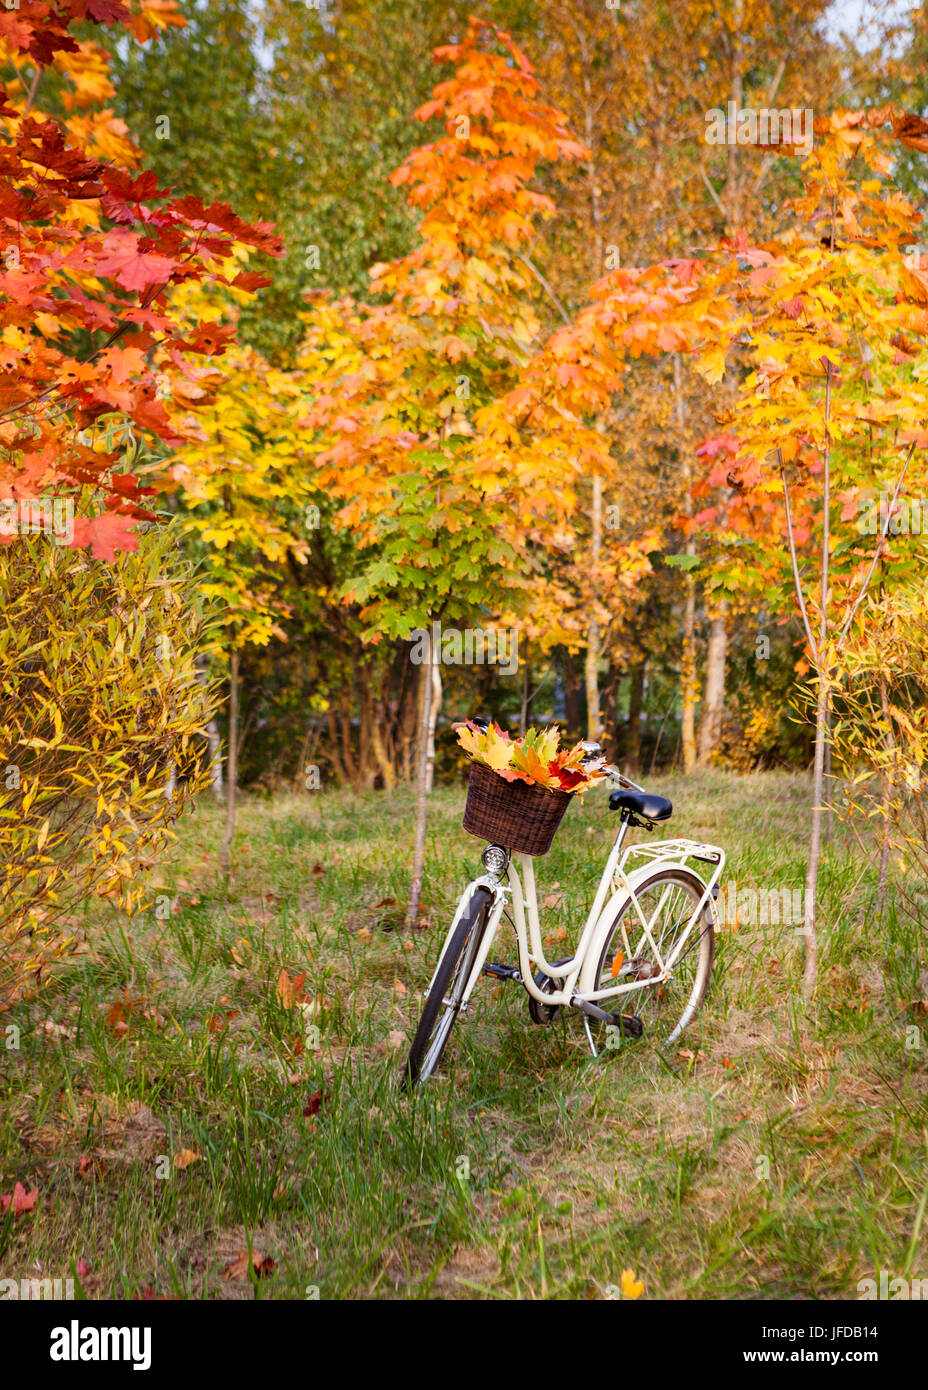 White retro style bicycle with basket with orange, yellow and green leaves, parked in the colorful fall park among trees, vertical background Stock Photo